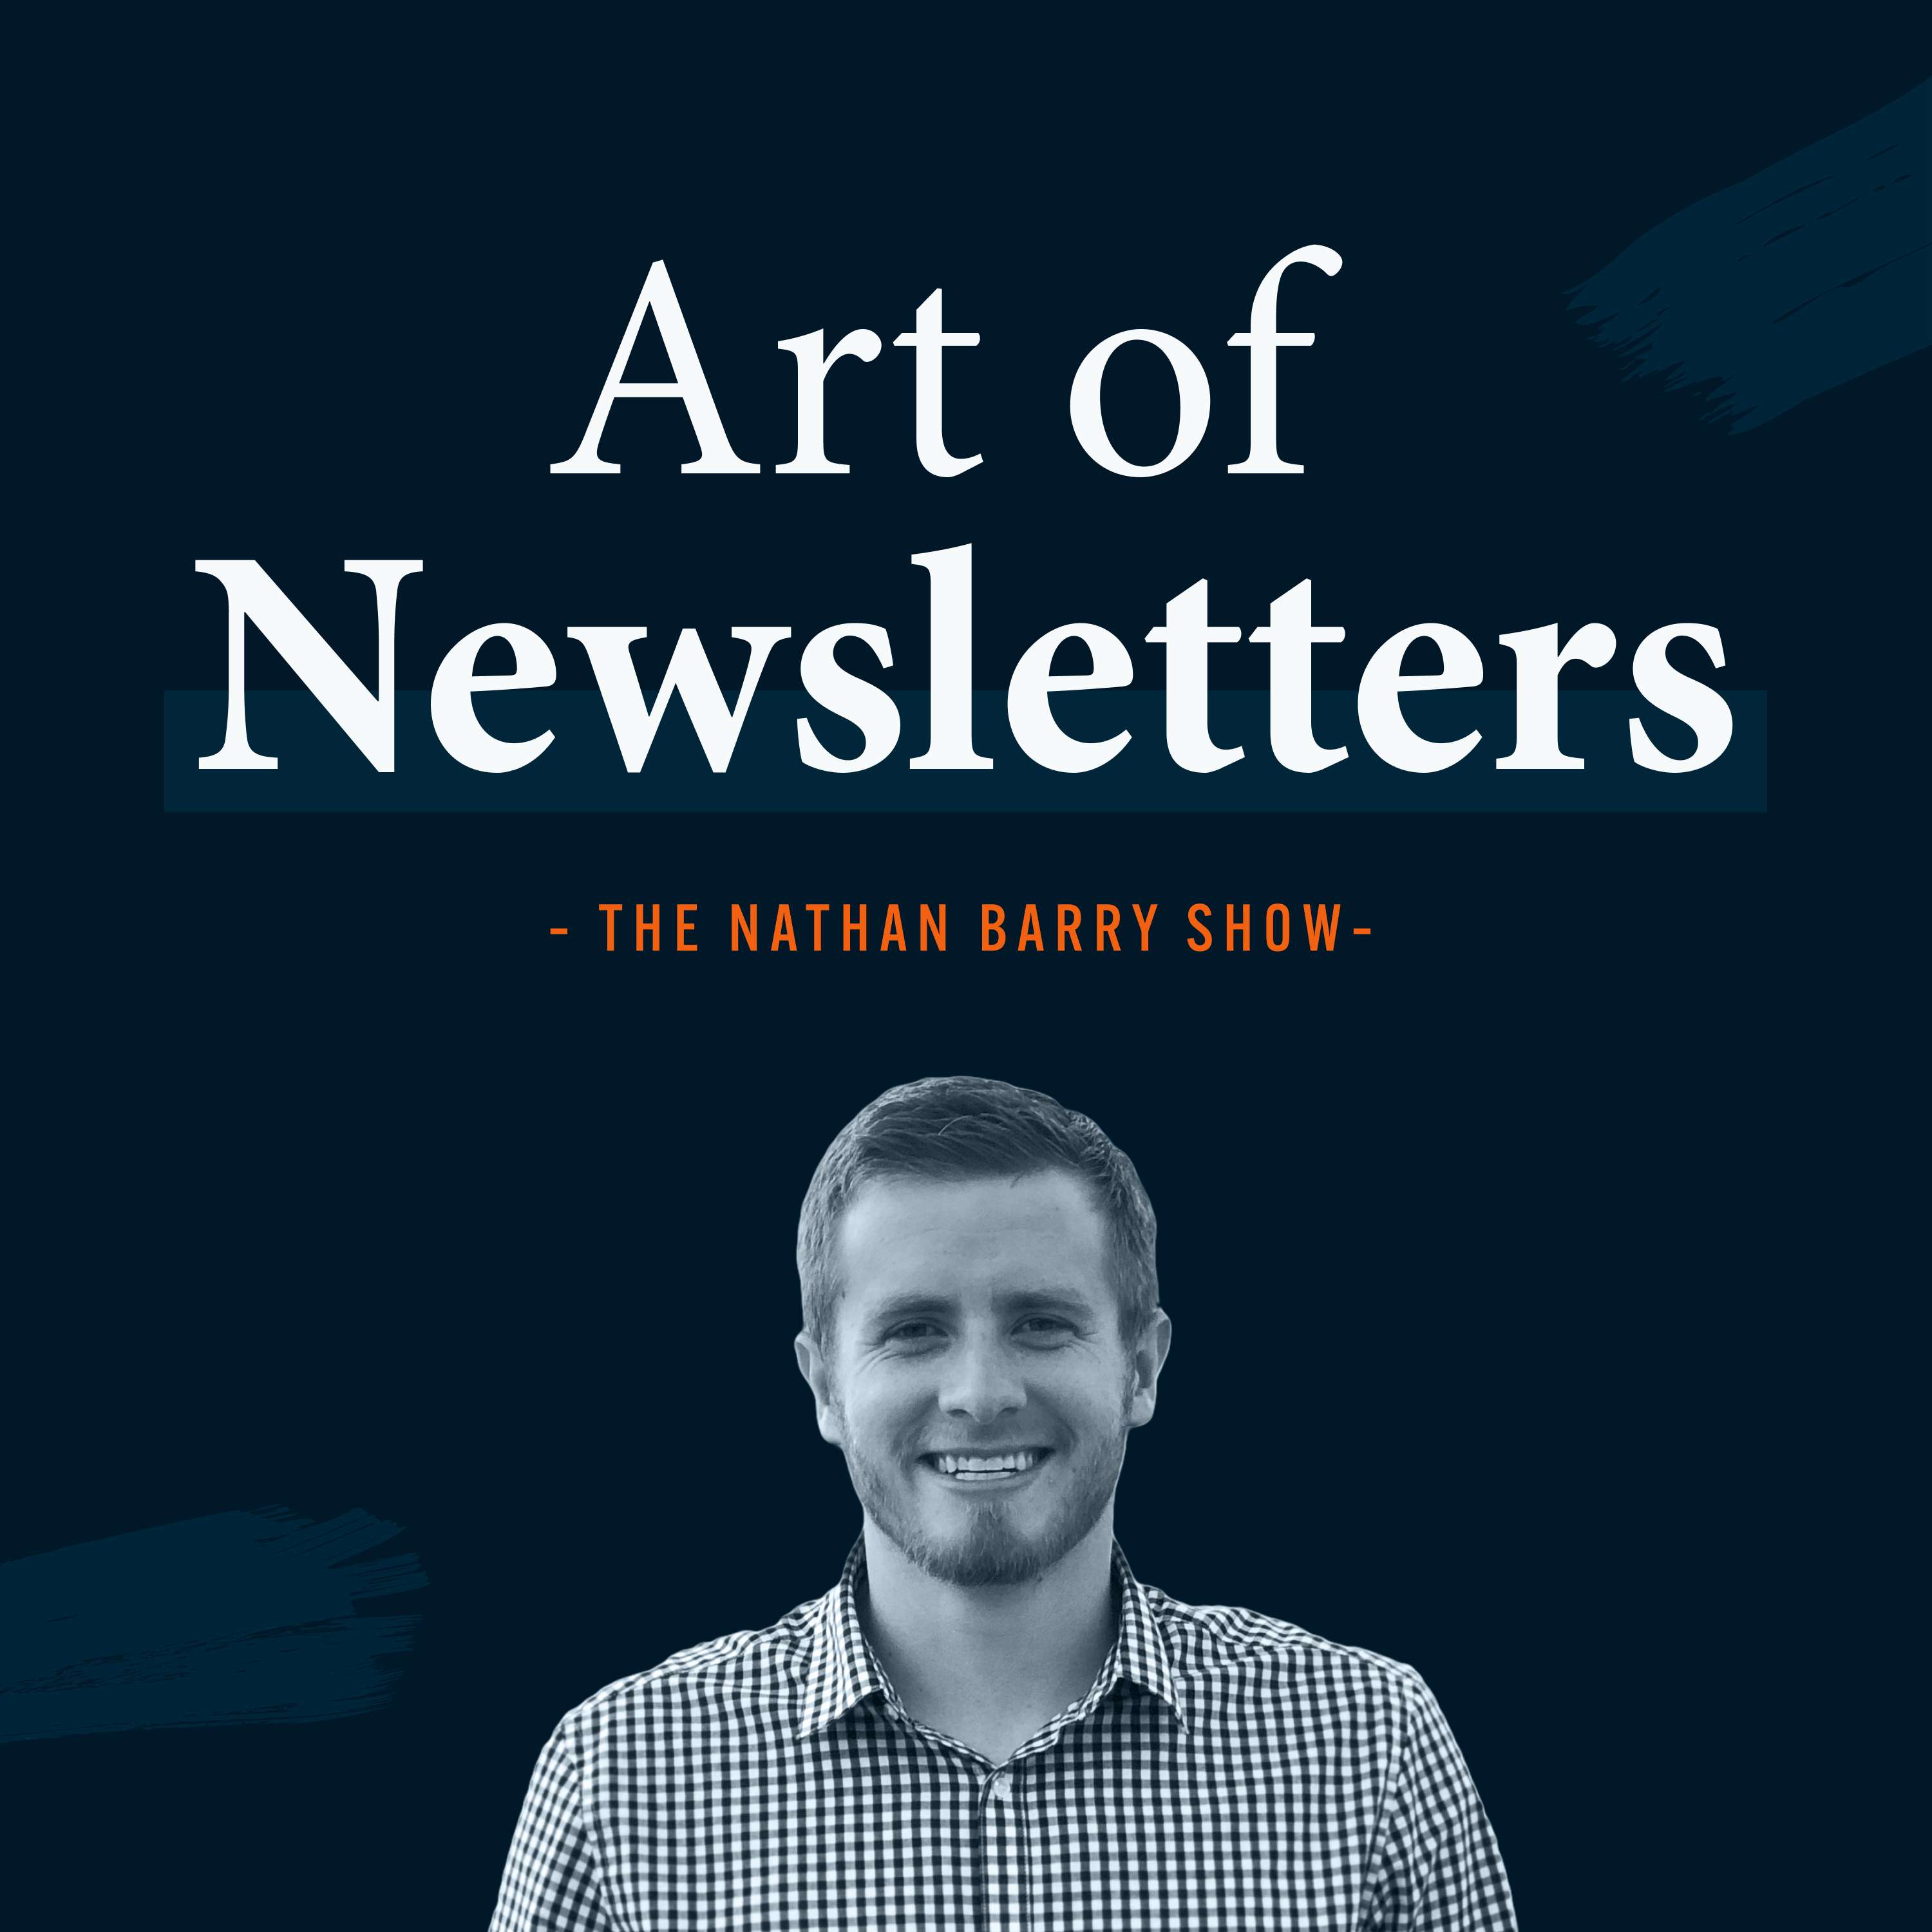 019: Dan Oshinsky – Turn Your Newsletter Into a Business (Lessons from Buzzfeed)